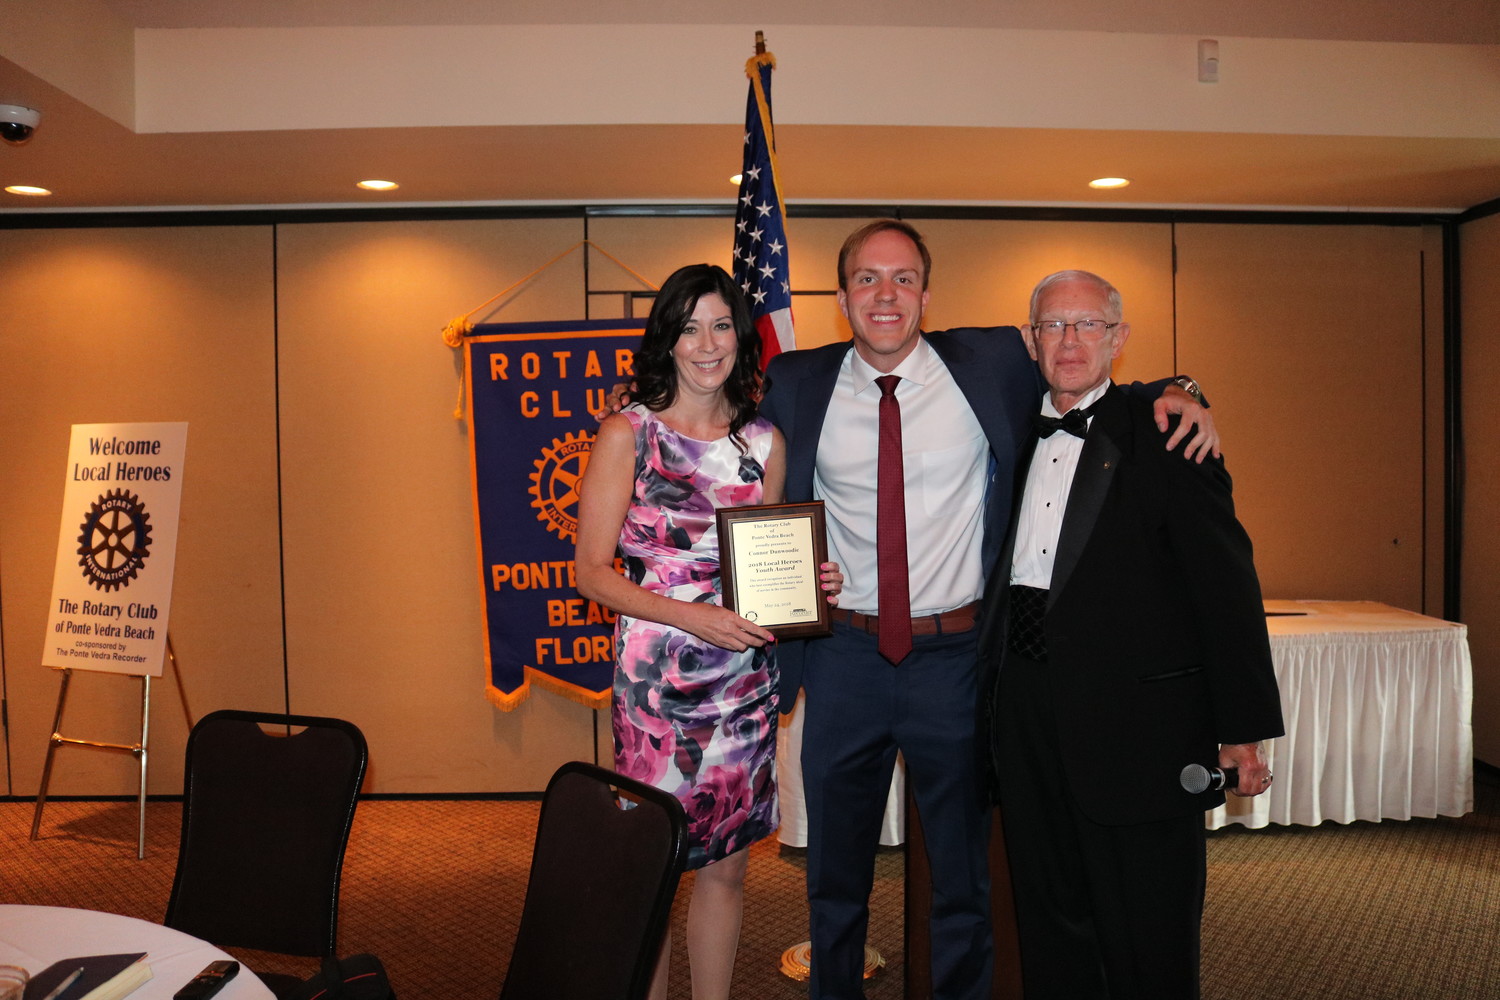 On behalf of Connor Dunwoodie, Rotarian Jennifer Logue receives the Local Heroes Youth Award from Ponte Vedra Recorder Editor Jon Blauvelt (center) and Rotarian Chuck Day (right).